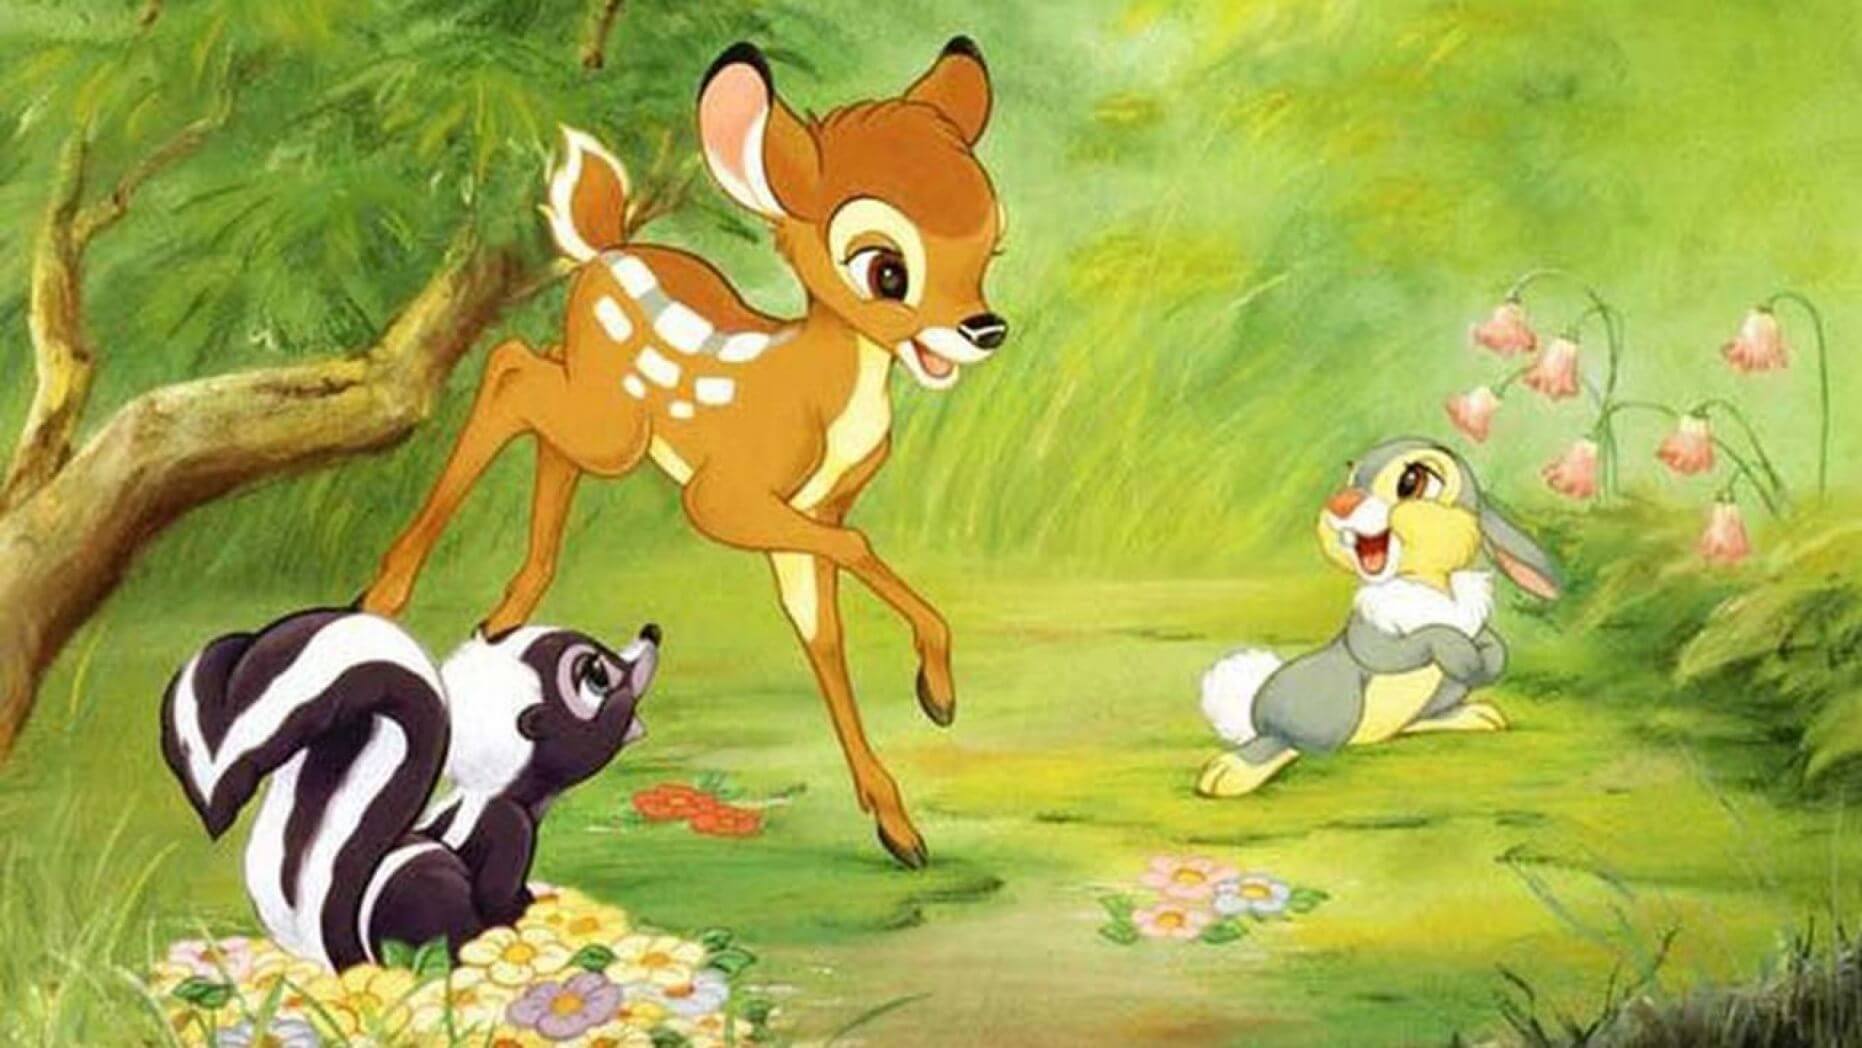 Bambi and his friends.